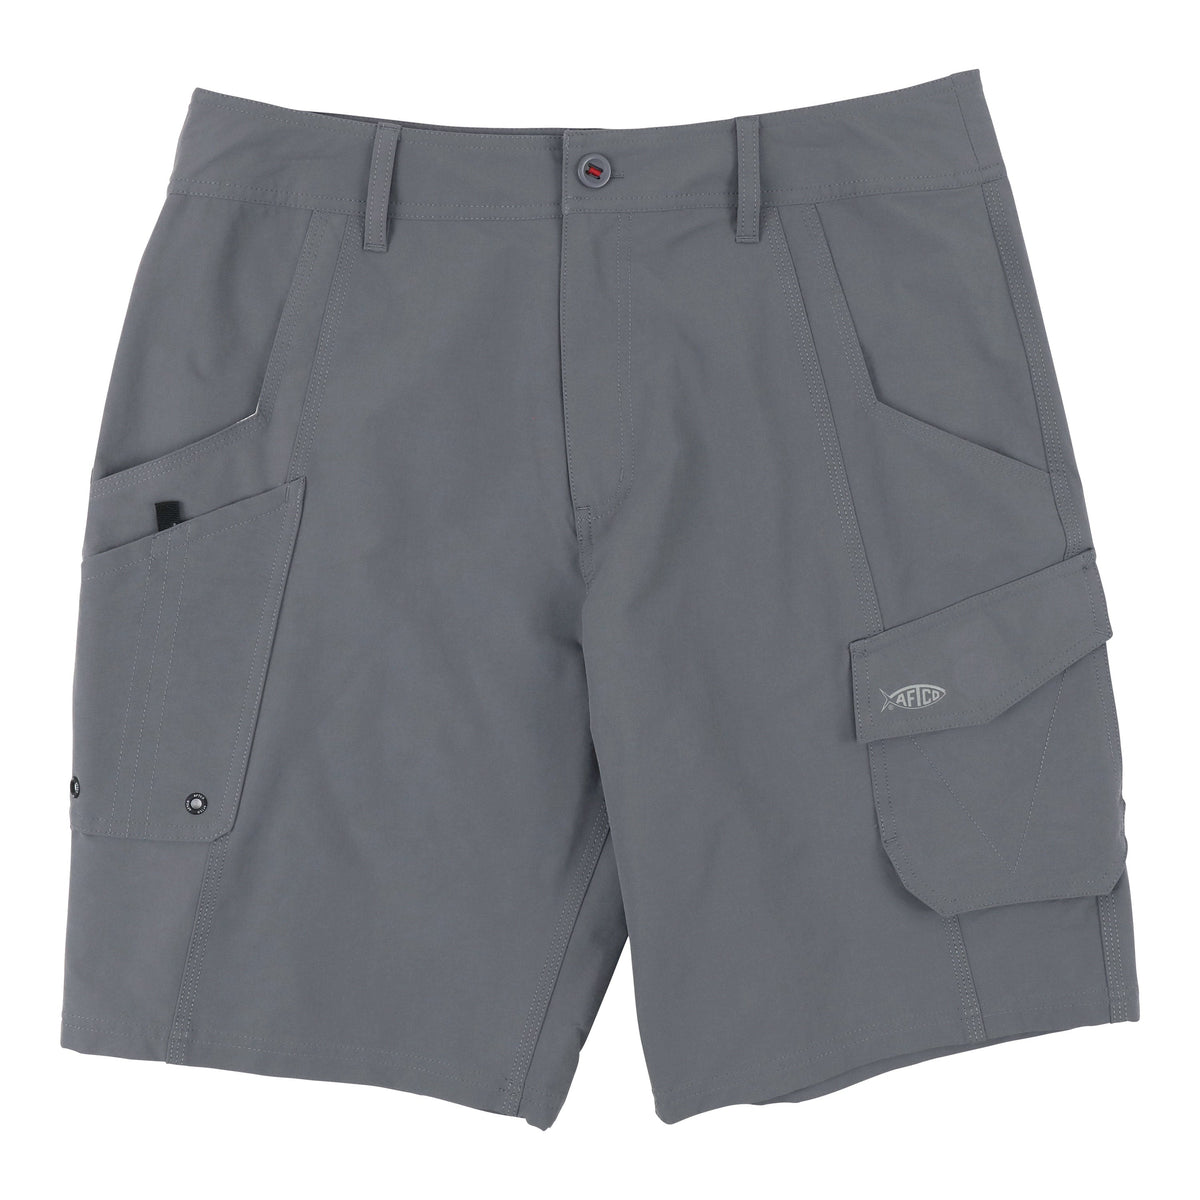 Aftco Stealth Fishing Shorts Charcoal